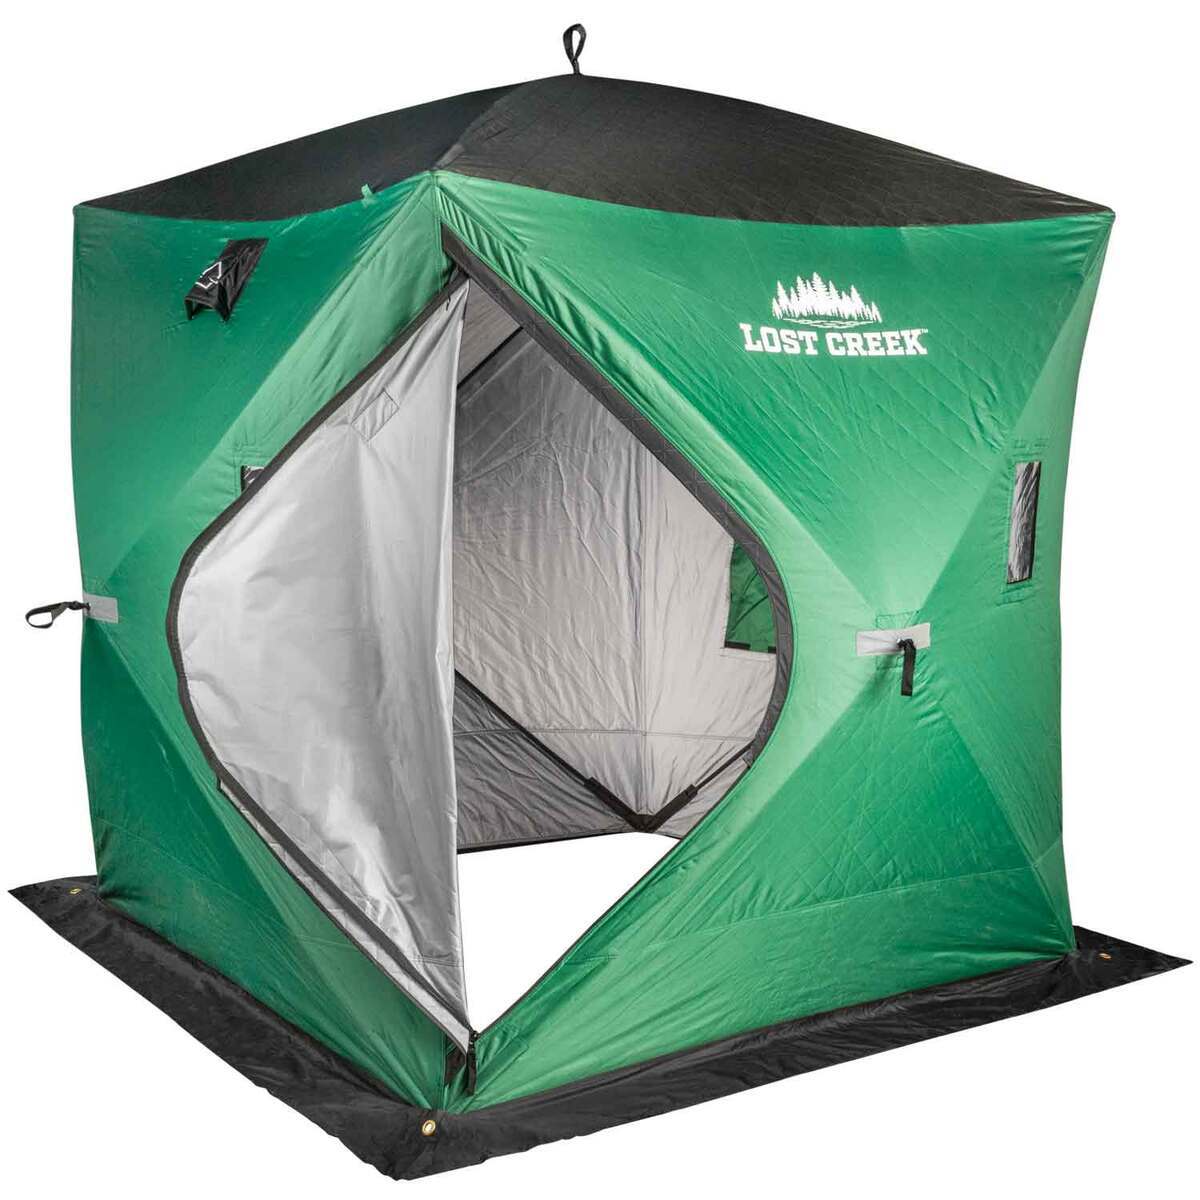 Outbound Ice Fishing Crystal 4 Shelter, 3-Person